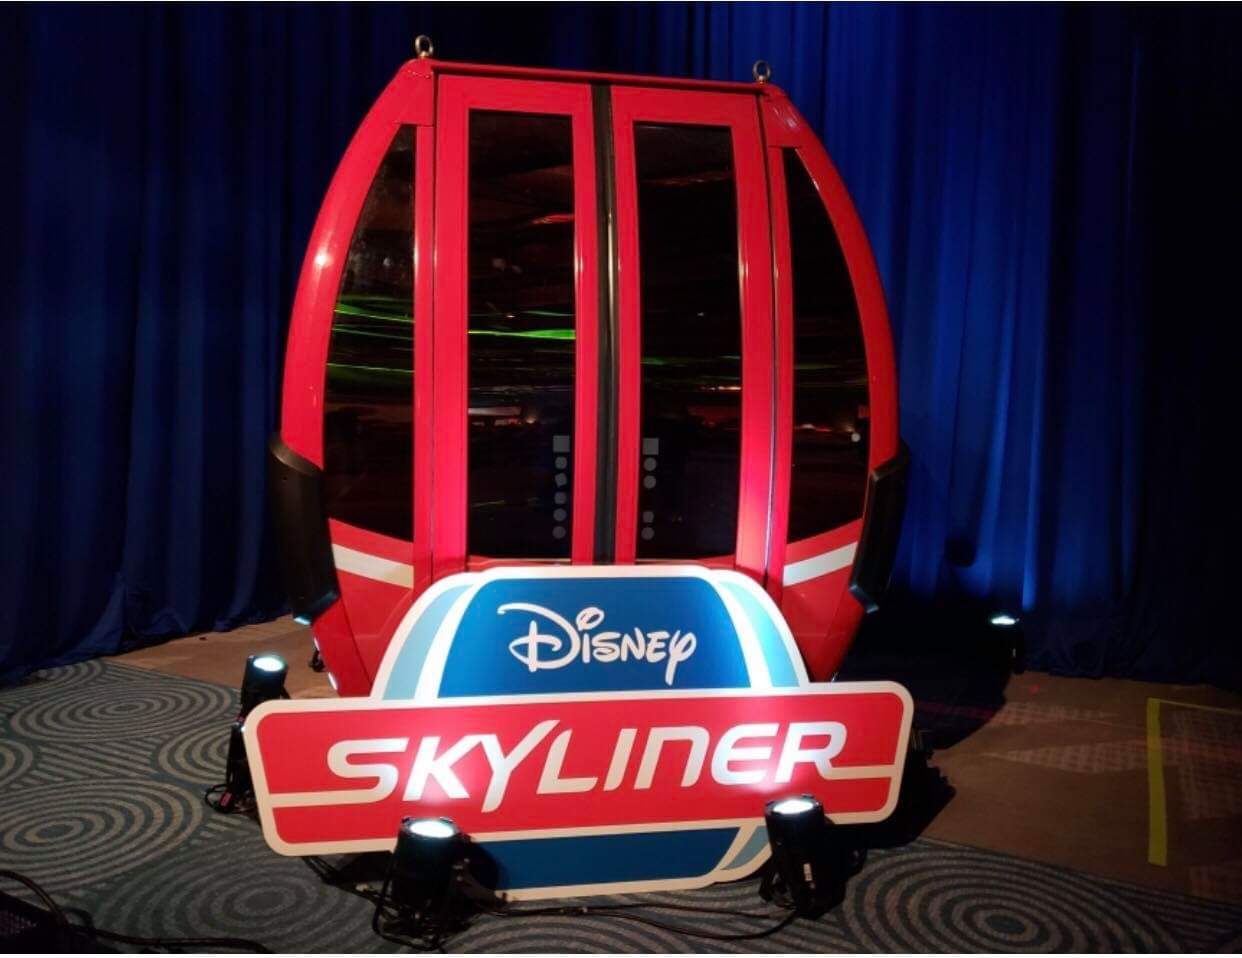 SKYLINER UPDATE: Skyliner Will Not Have Air Conditioning